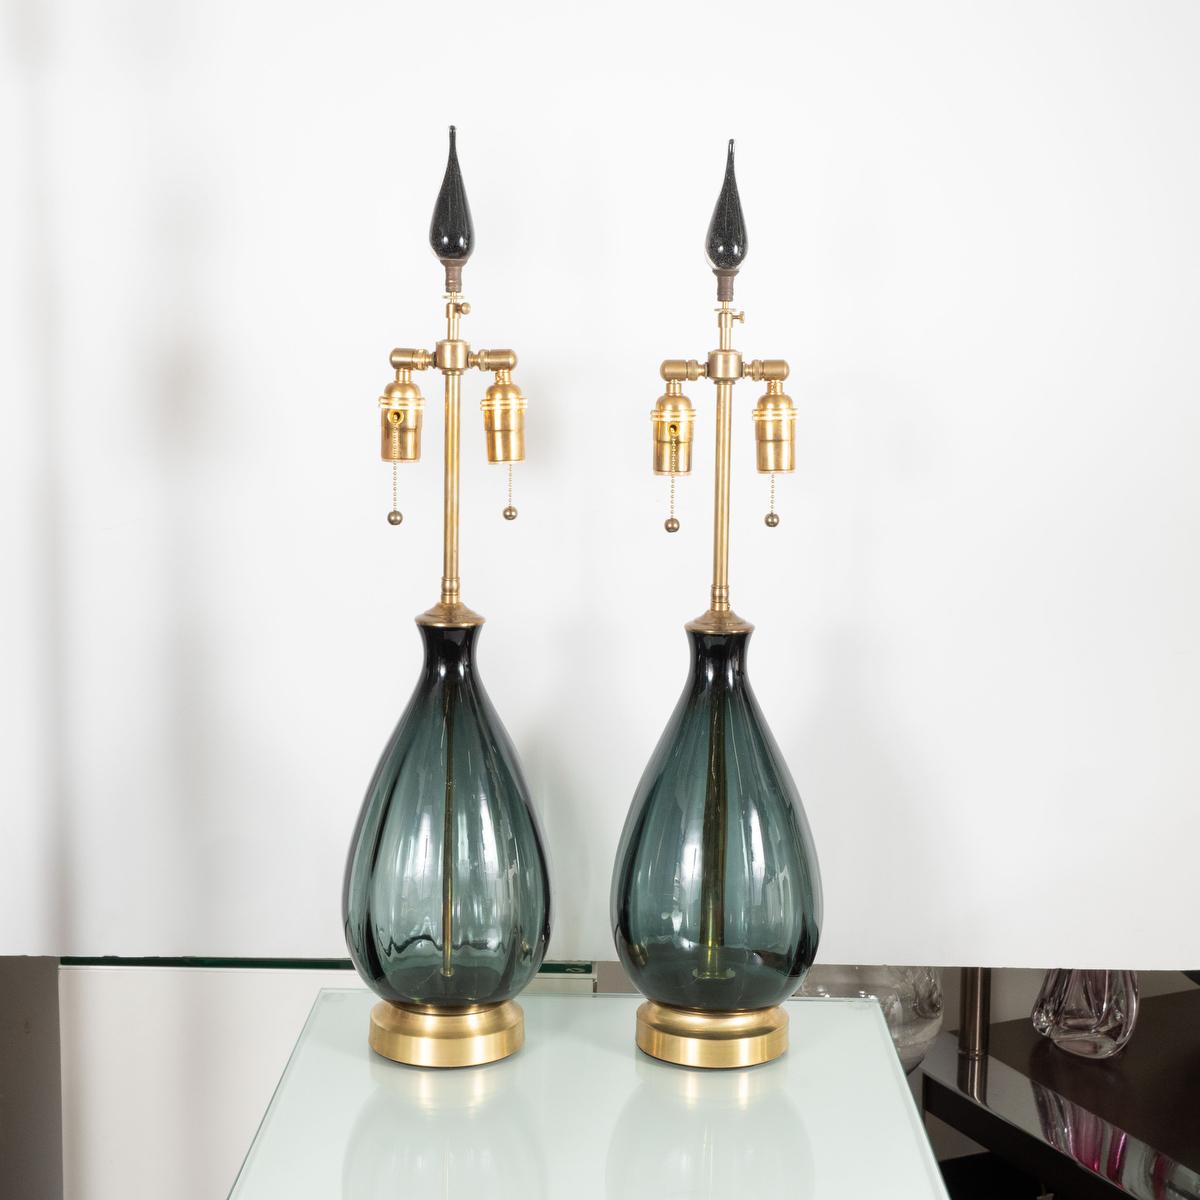 Pair of smoked glass teardrop lamps with glass finials by Blenko.